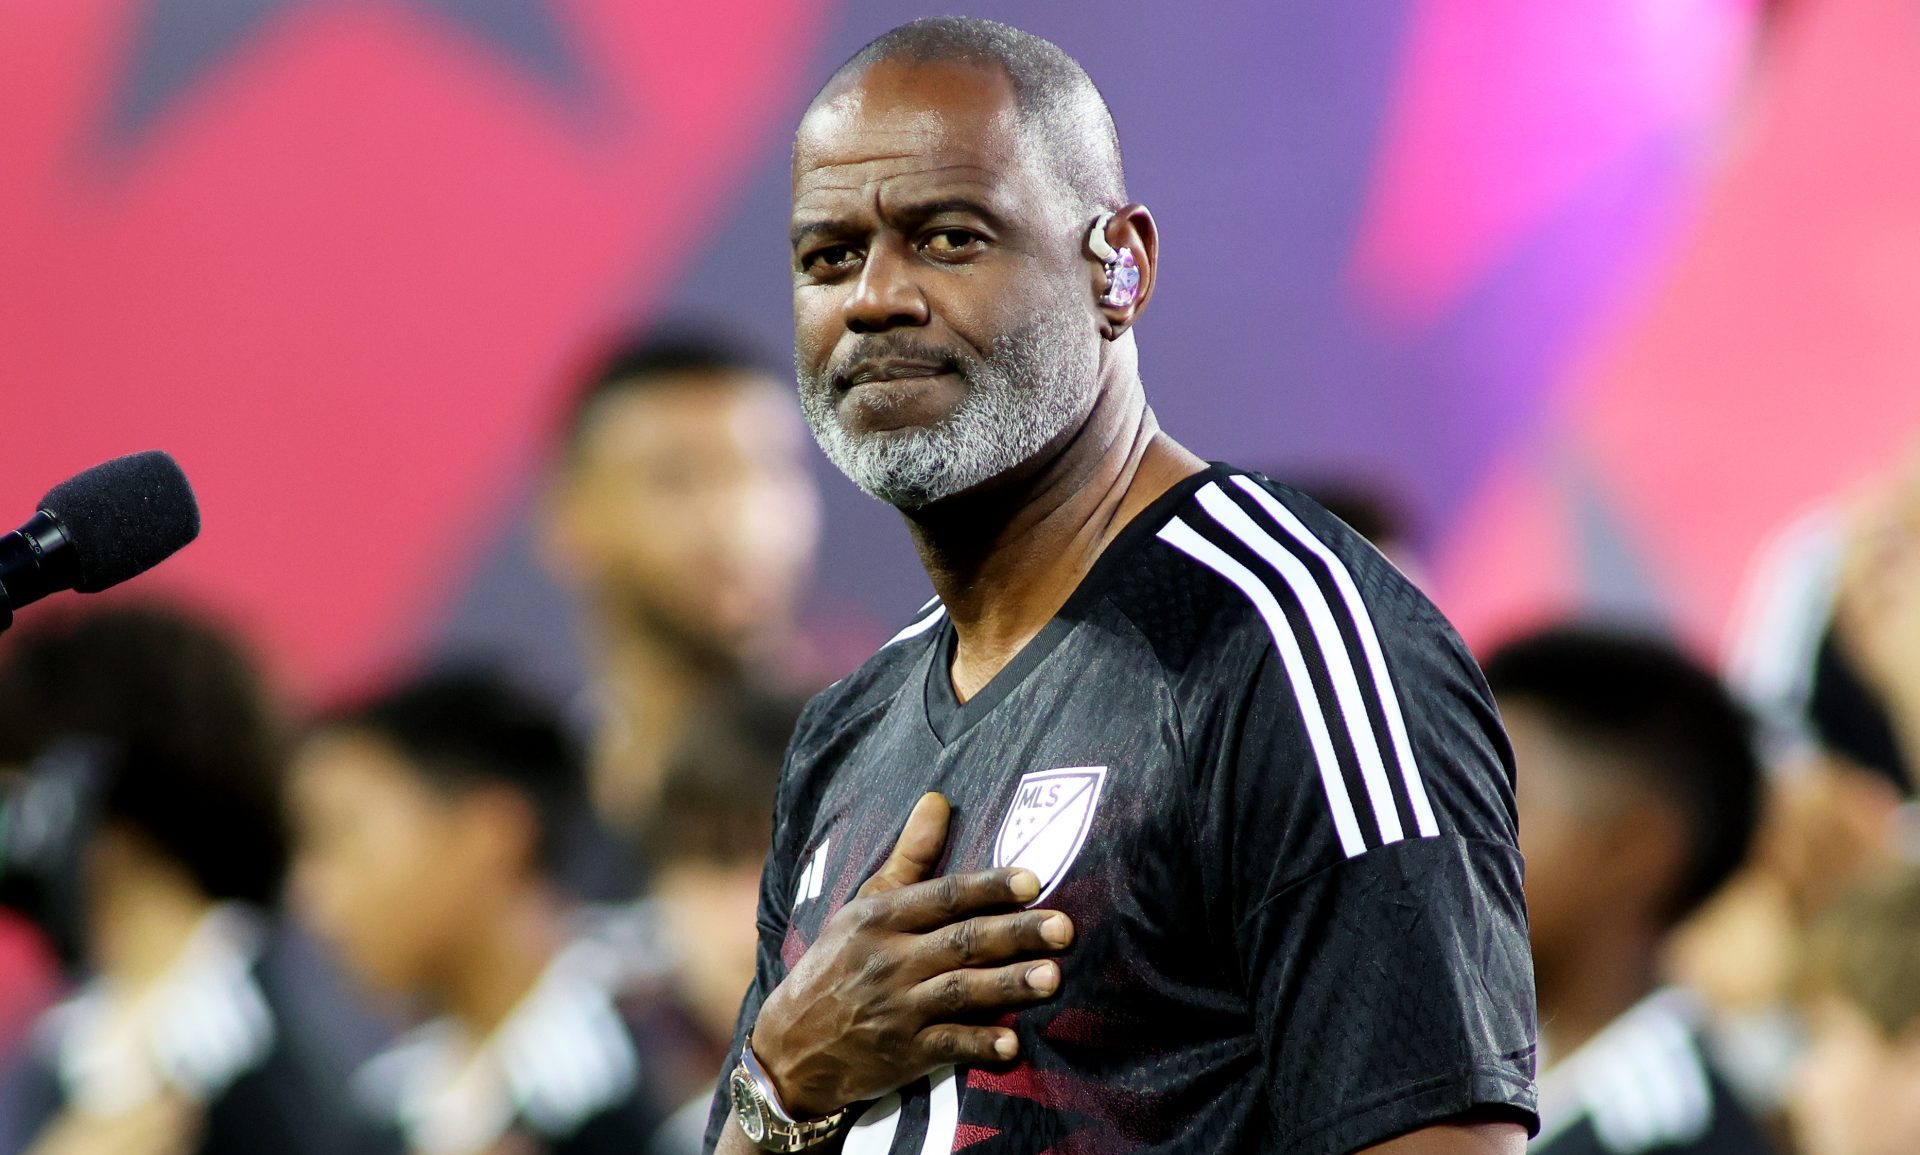 Whew! Watch Brian McKnight’s Spicy Reaction To THIS Comment About His Biological Kids thumbnail